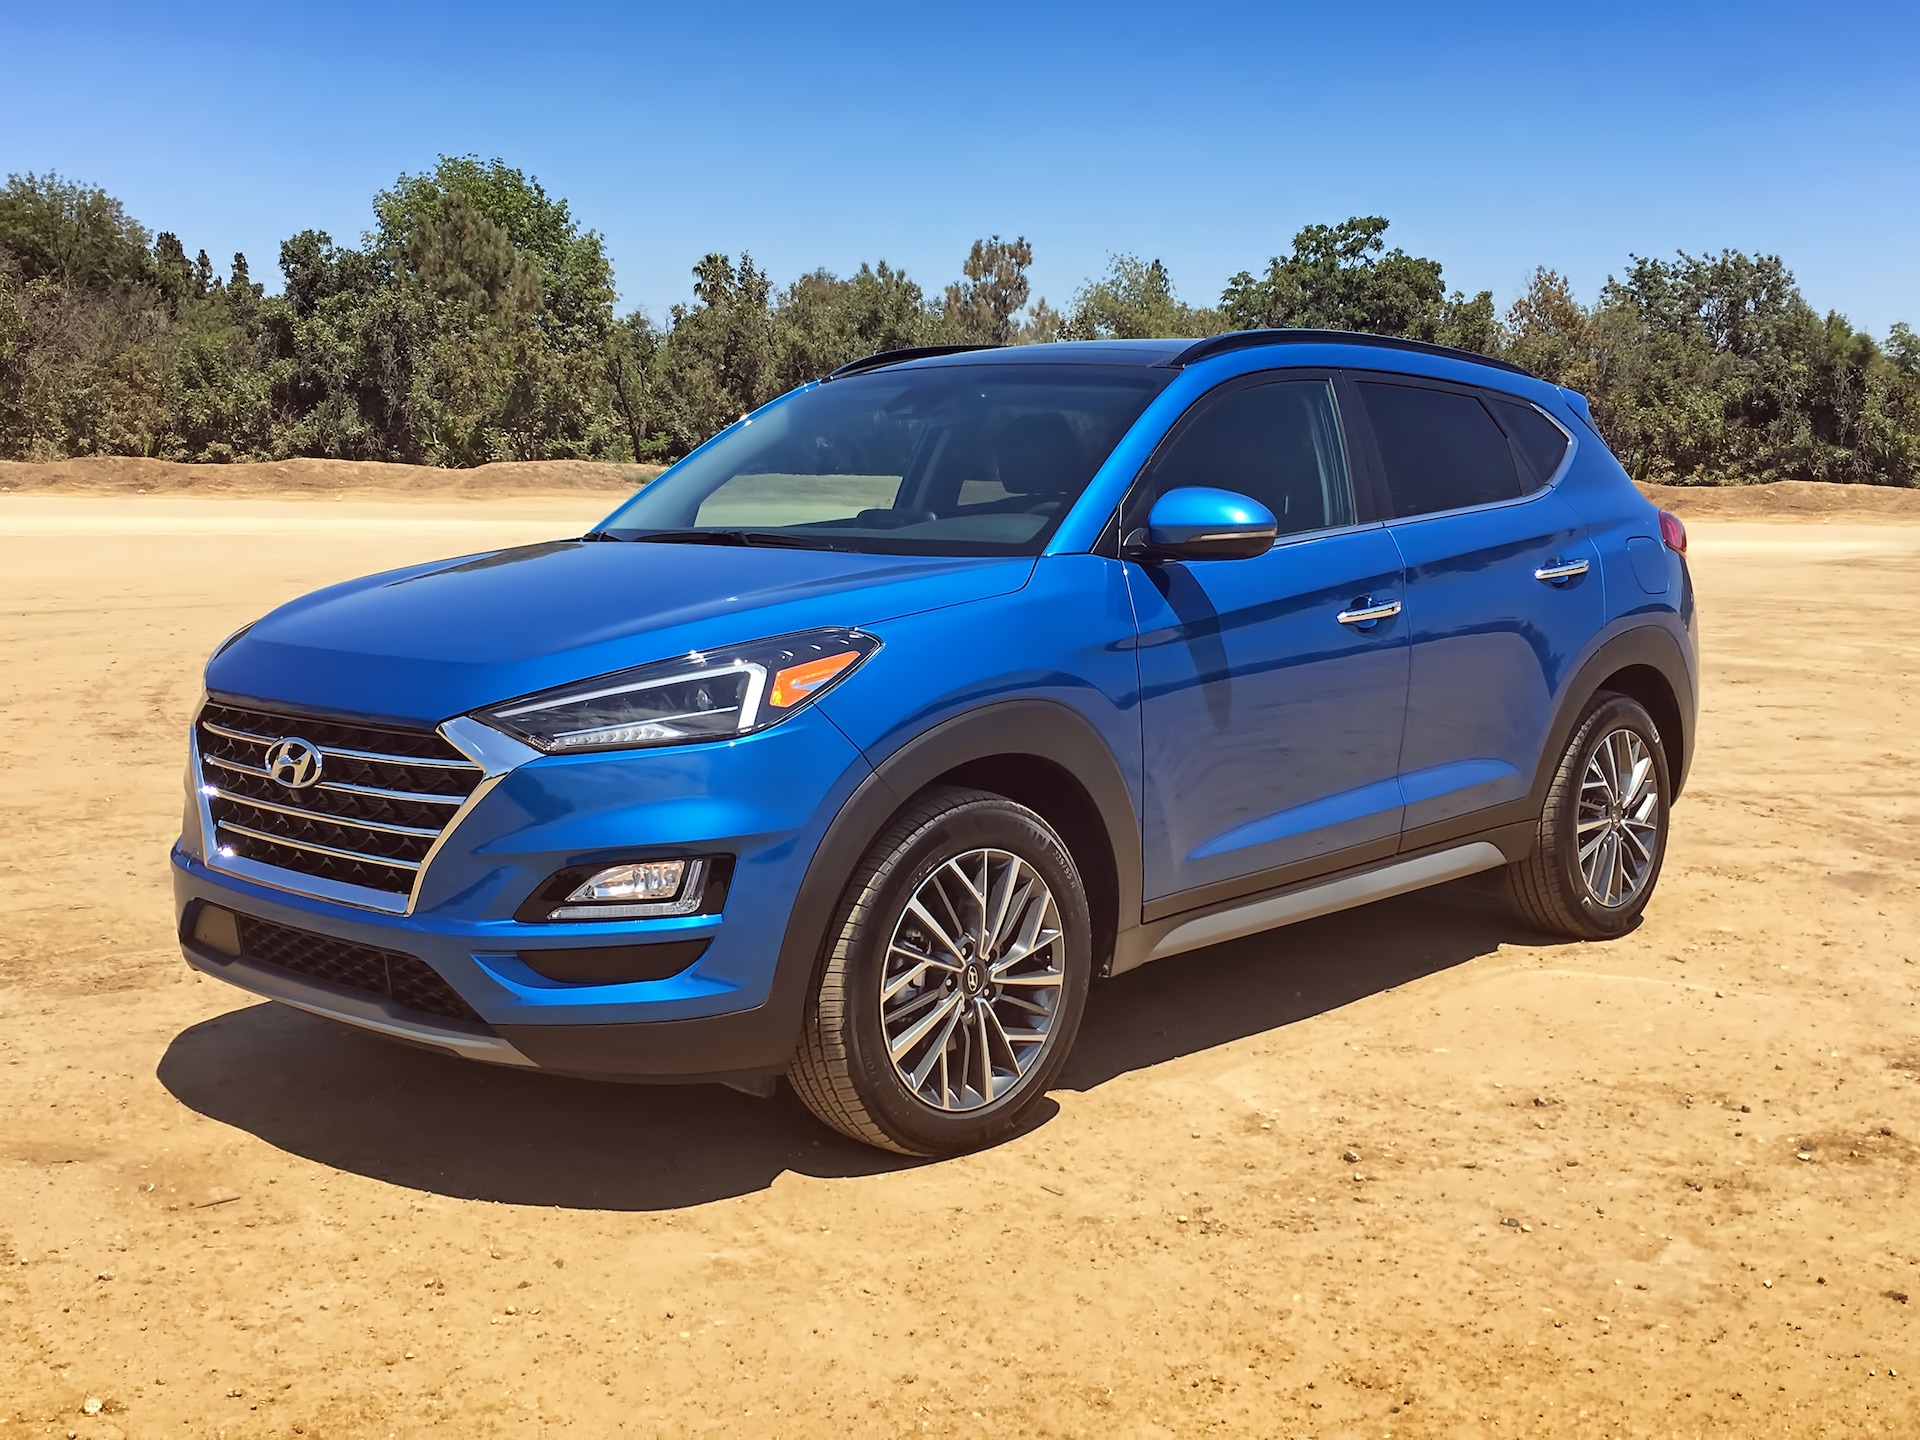 2019 Hyundai Tucson Ultimate FWD Review: It's Ultimate Alright